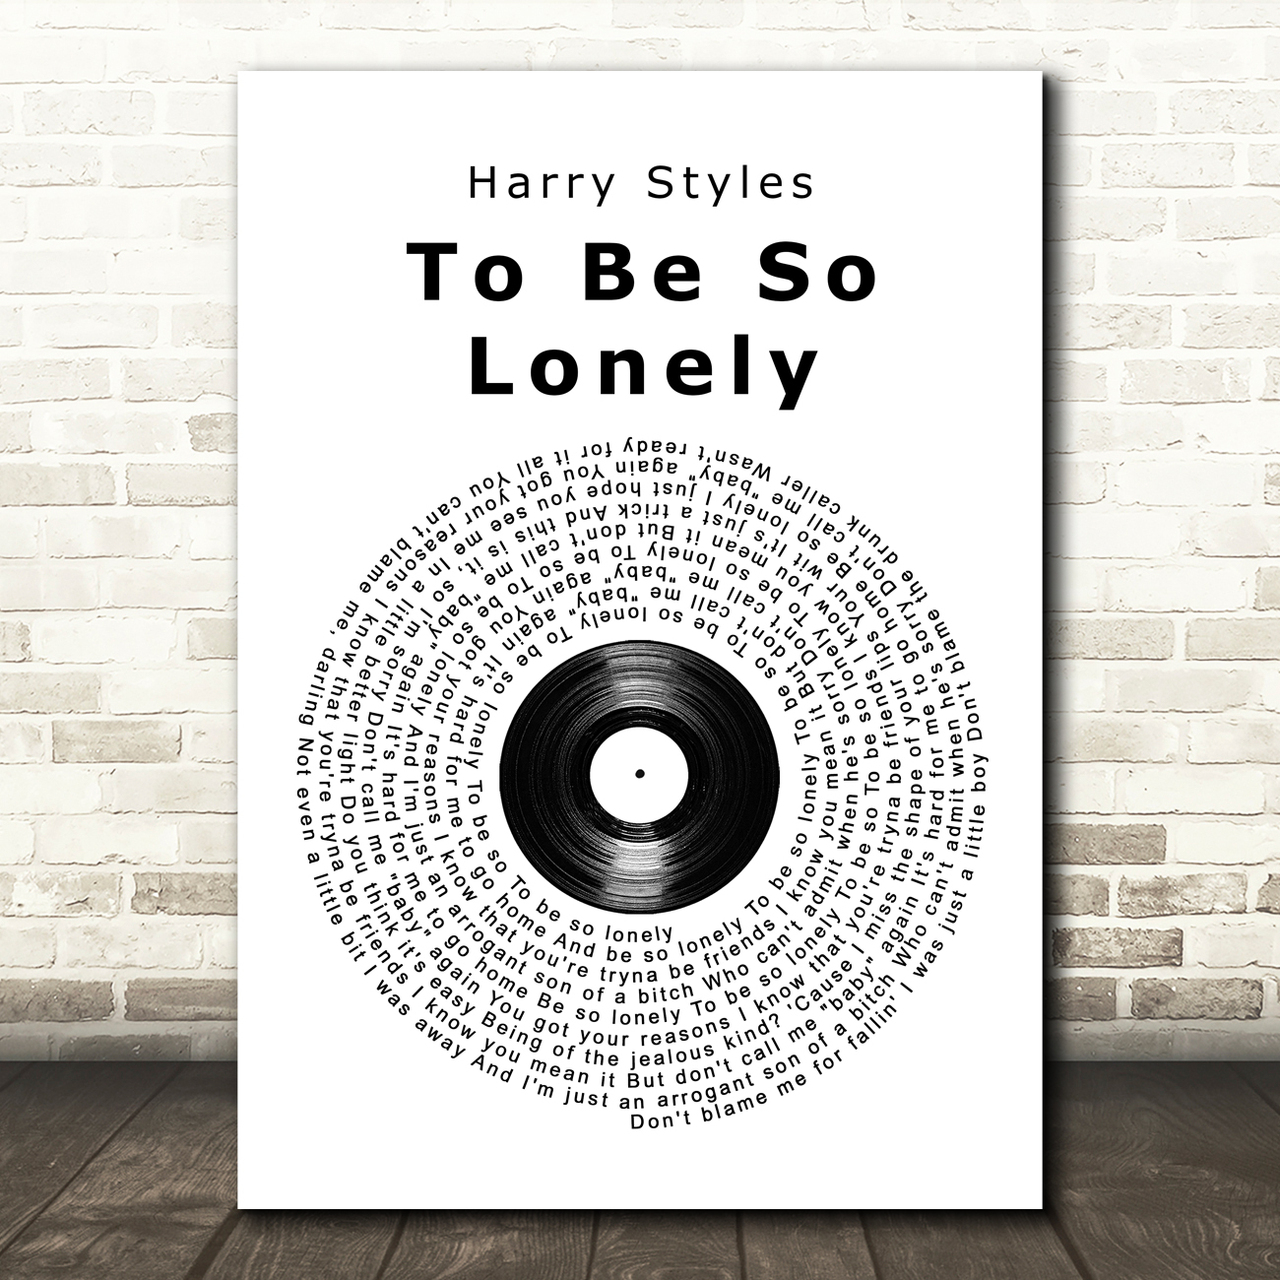 Harry Styles To Be So Lonely Vinyl Record Song Lyric Music Art Print